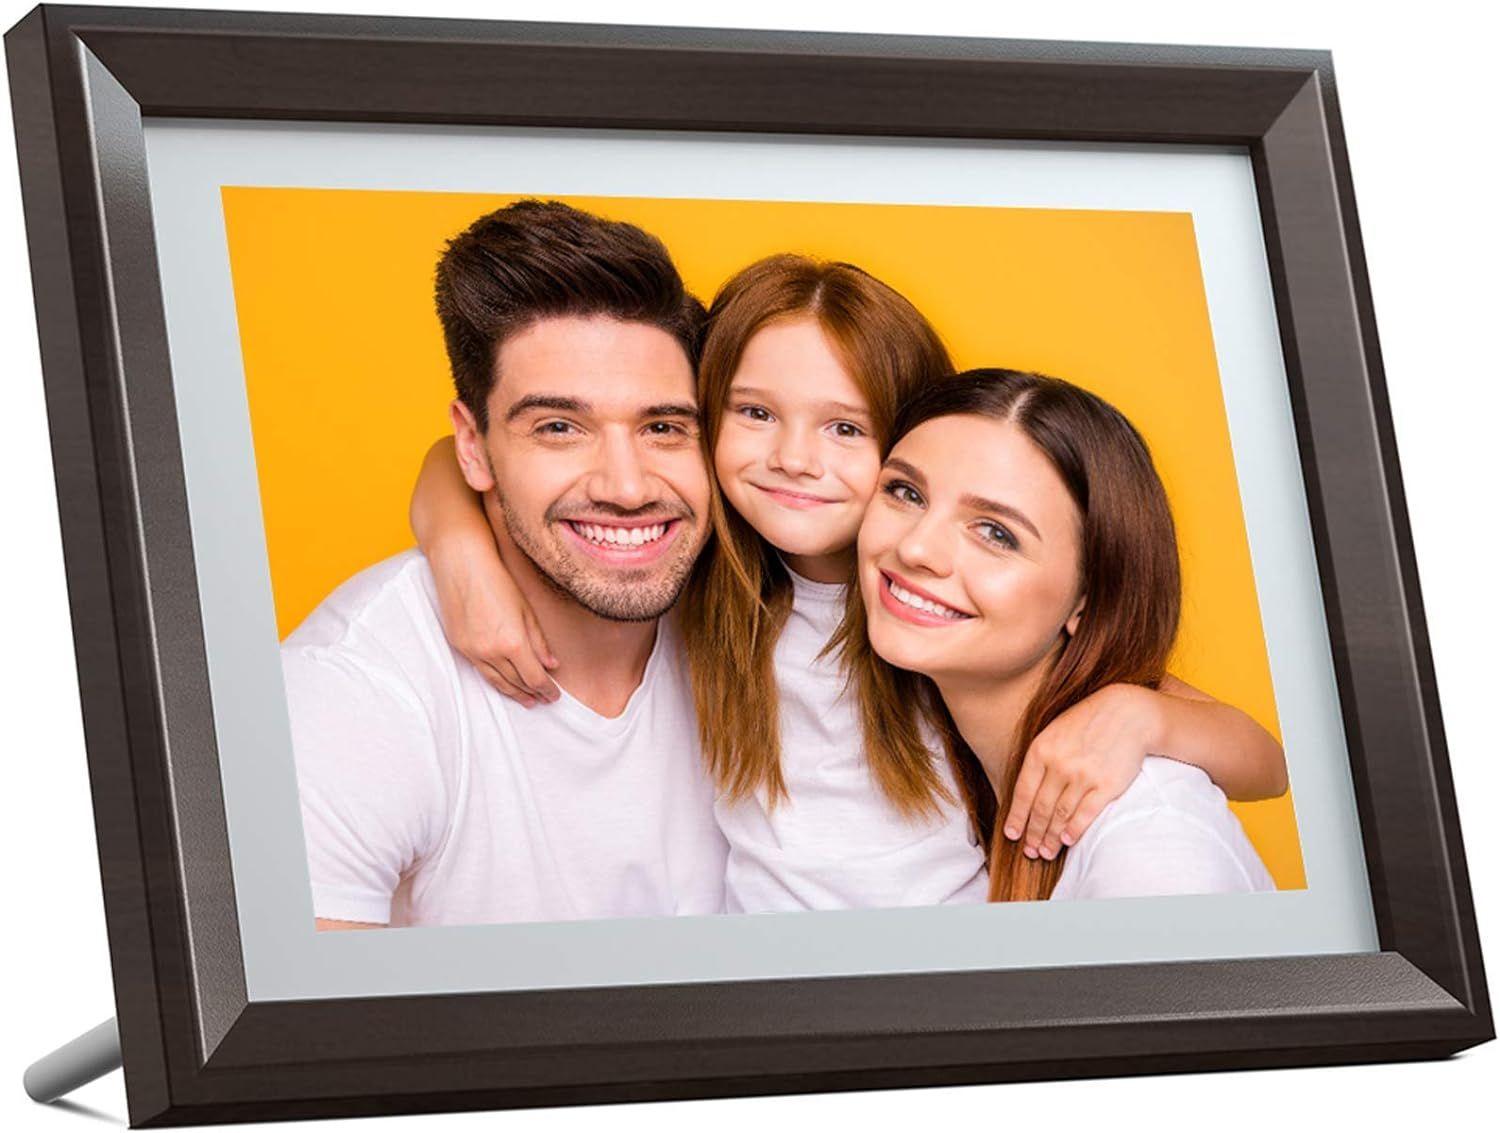 Dragon Touch Digital Picture Frame WiFi 10 inch IPS Touch Screen HD Display, 16GB Storage, Auto-Rota | Amazon (US)